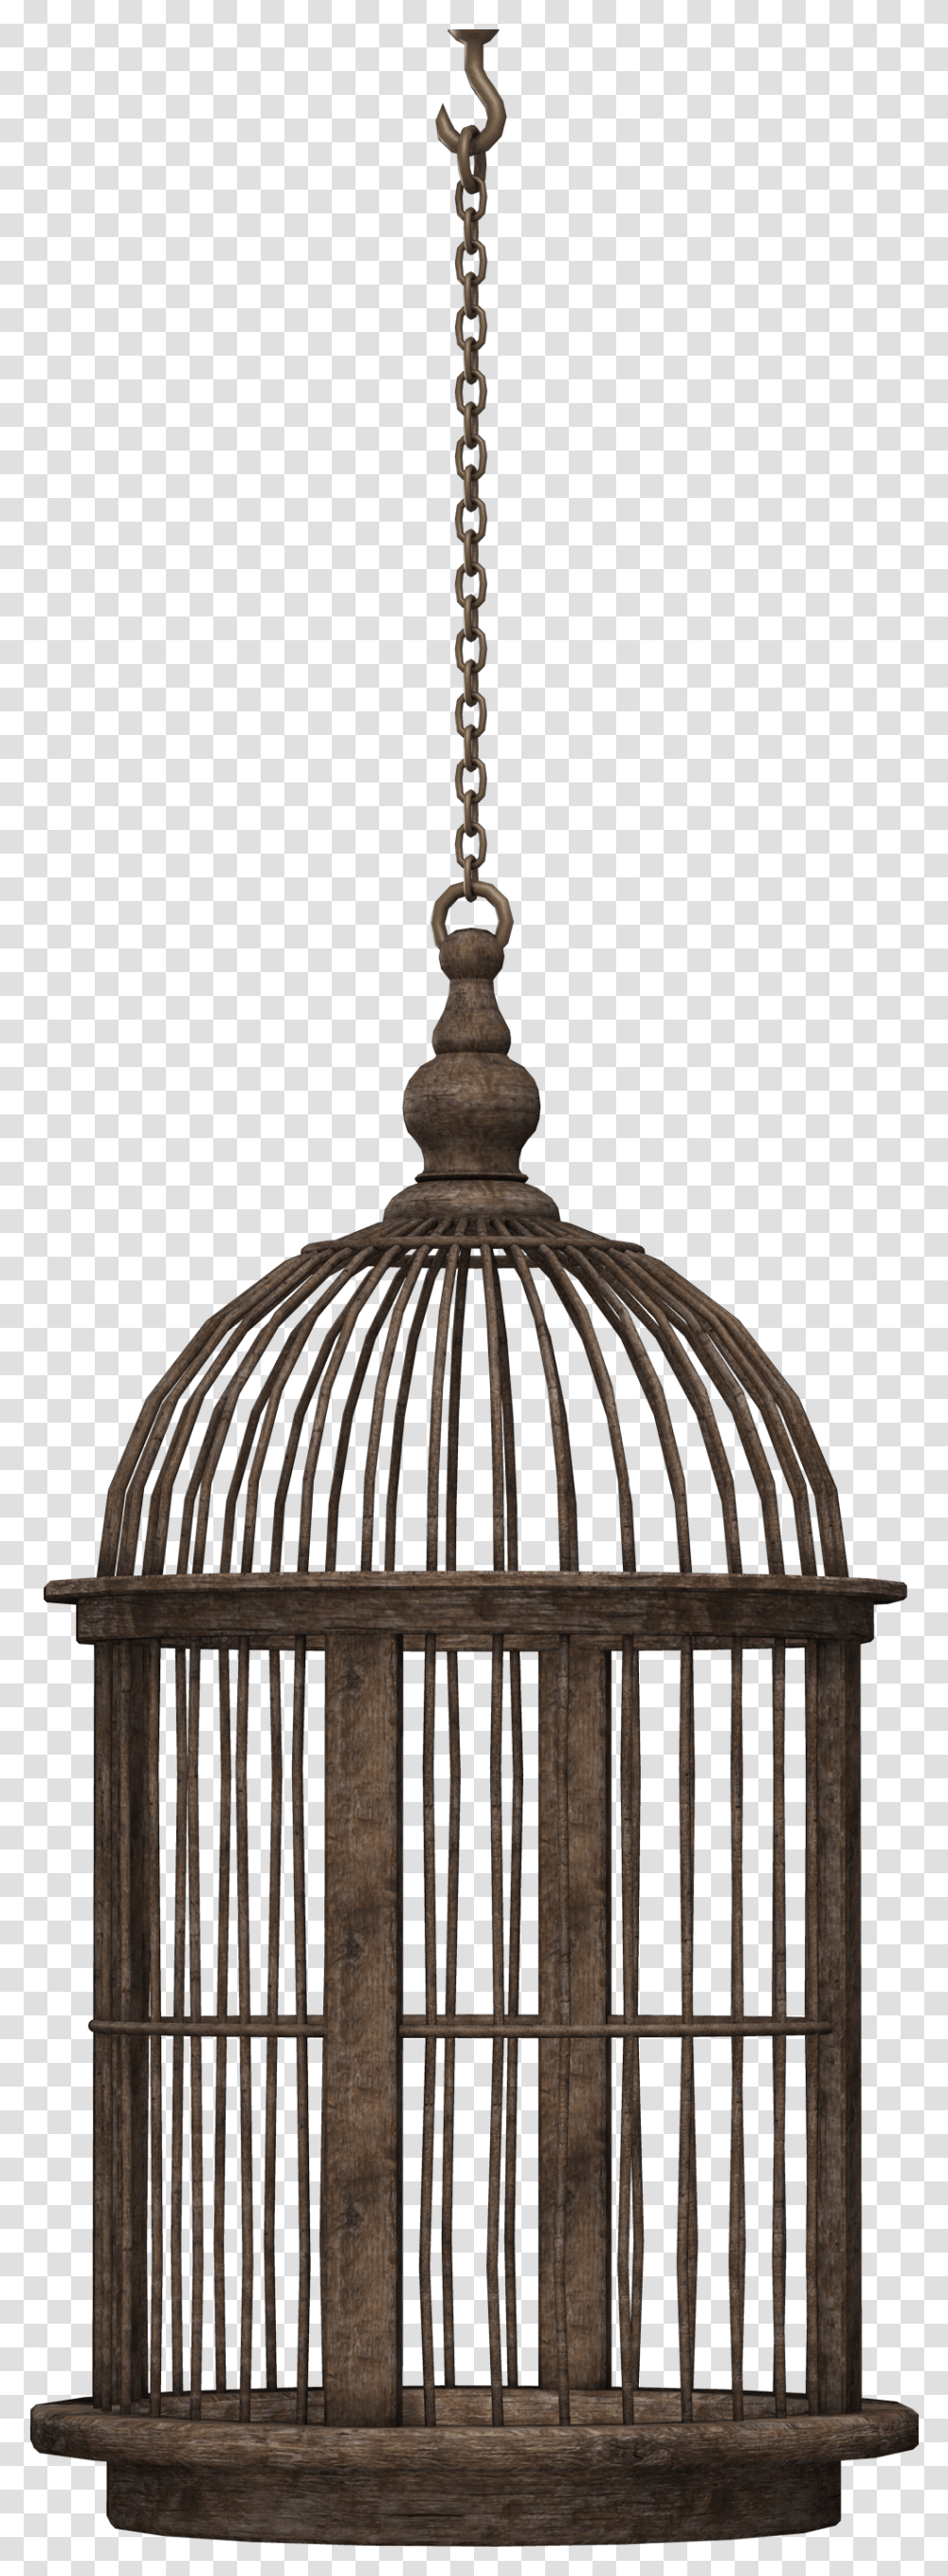 Bird Cage Image Bird Cage, Dome, Architecture, Building, Chandelier Transparent Png